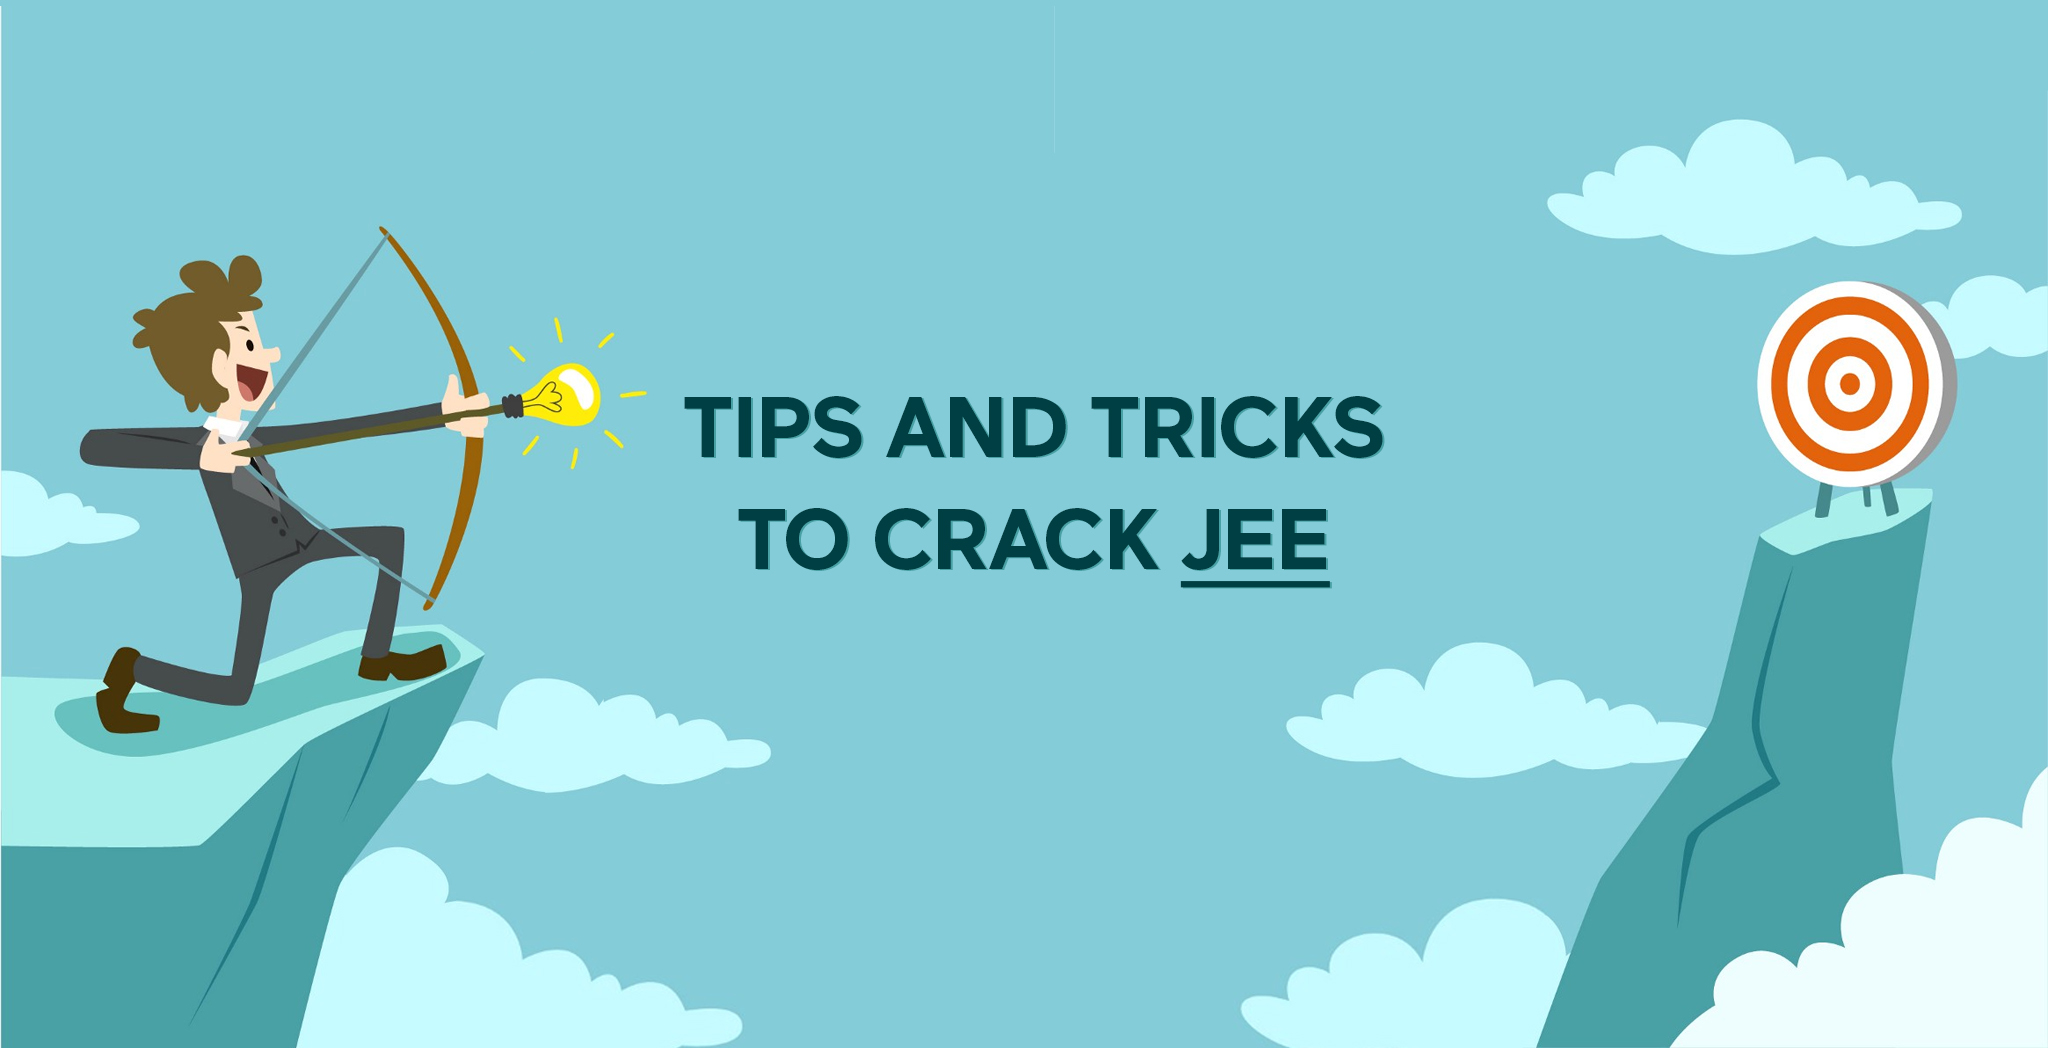 Tips and Tricks to Crack JEE